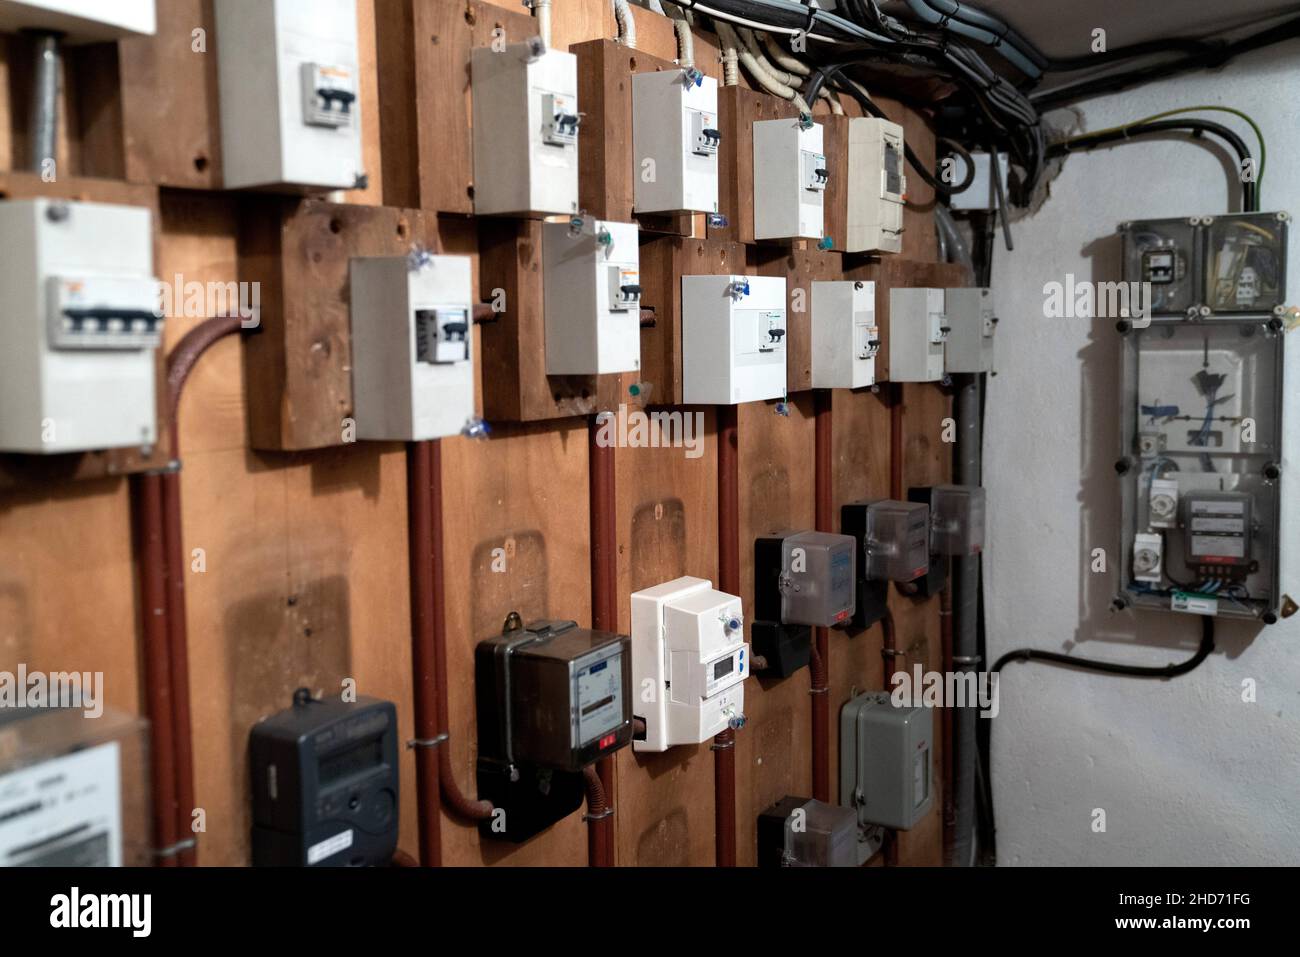 Group of electrical circuit breakers in disuse. Stock Photo